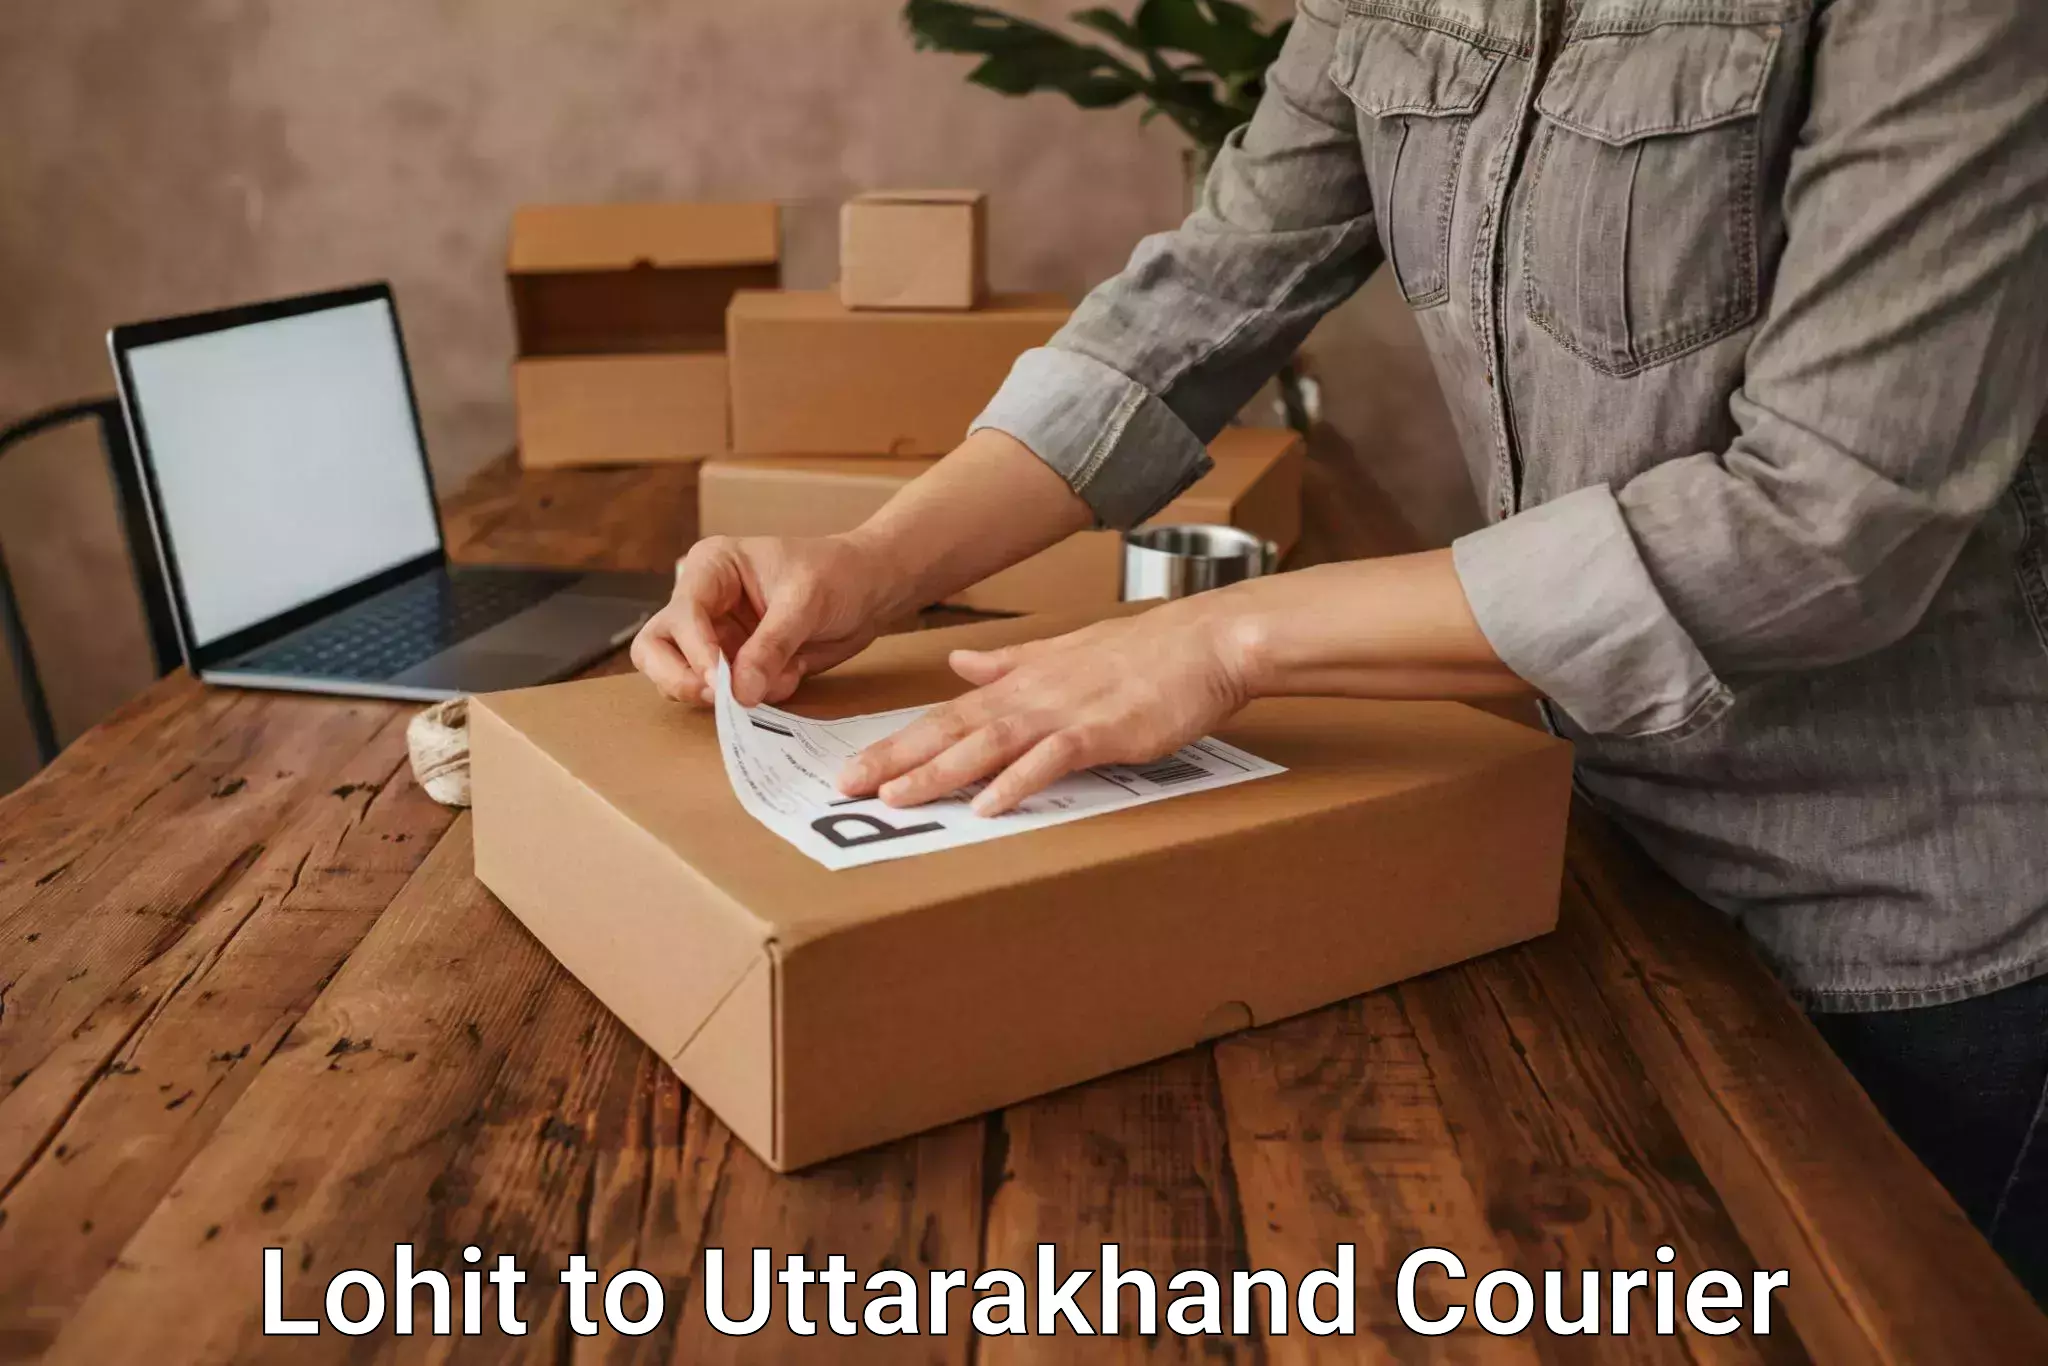 On-call courier service Lohit to Uttarakhand